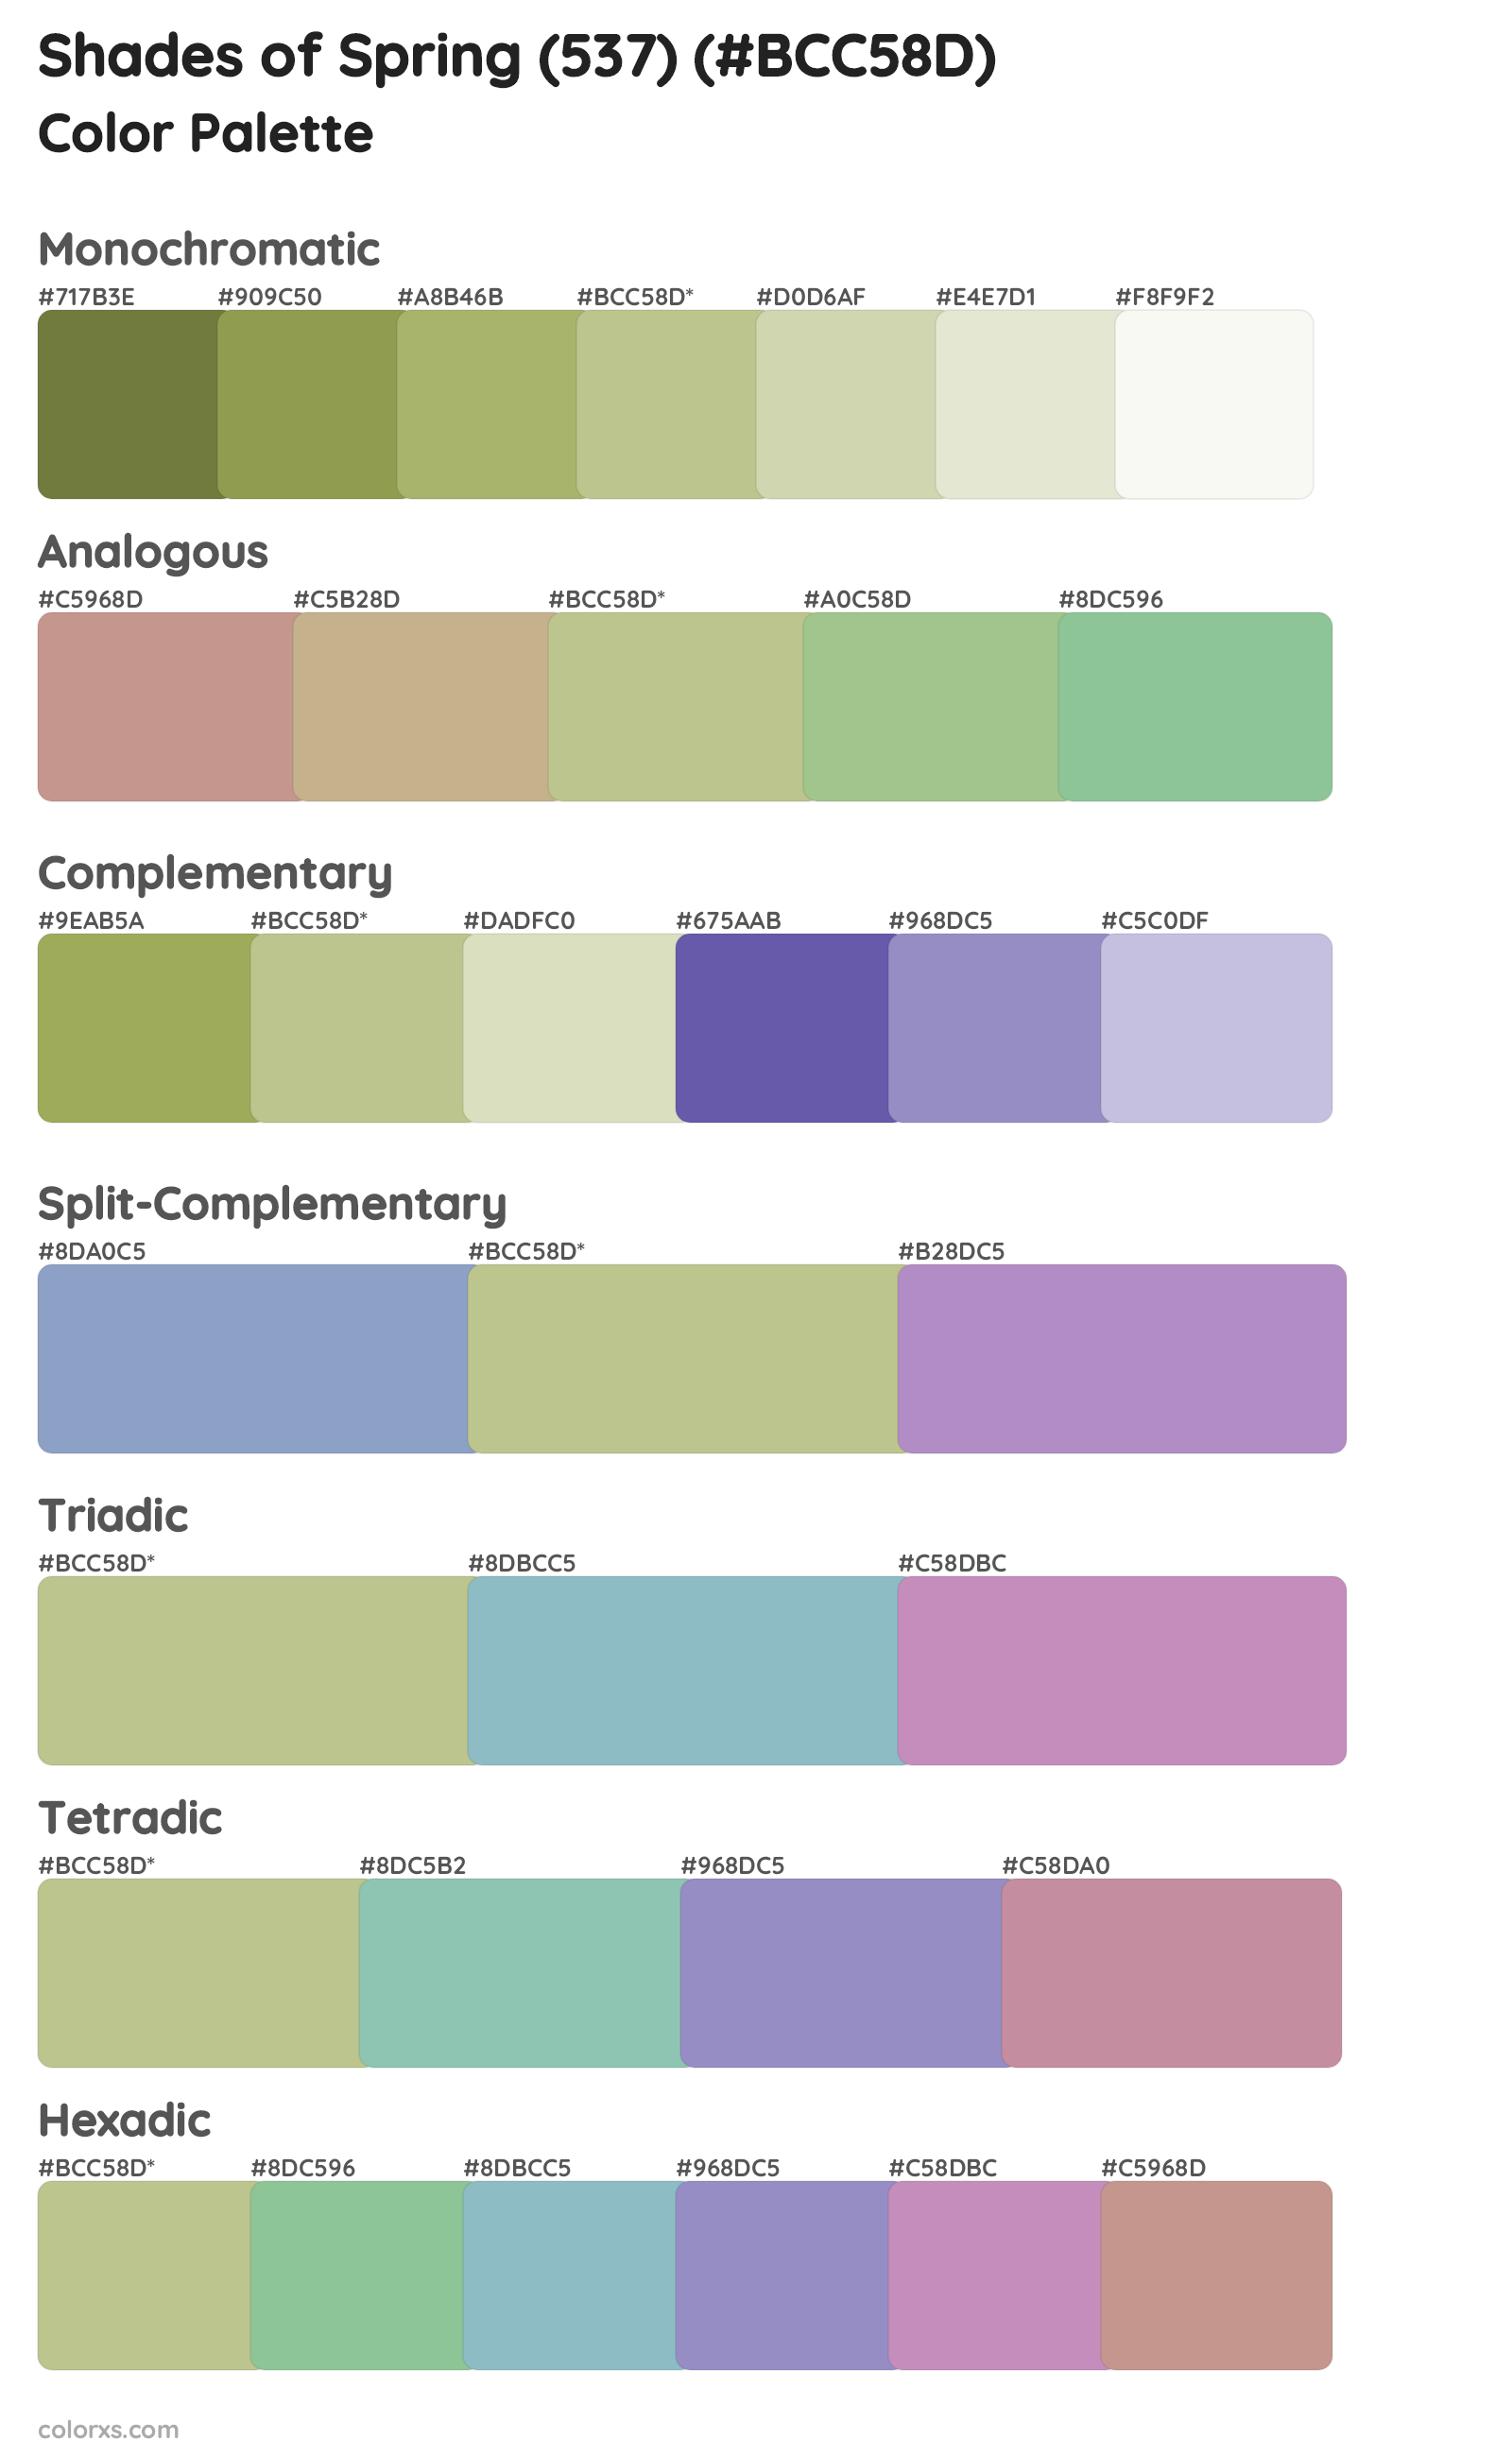 Shades of Spring (537) Color Scheme Palettes